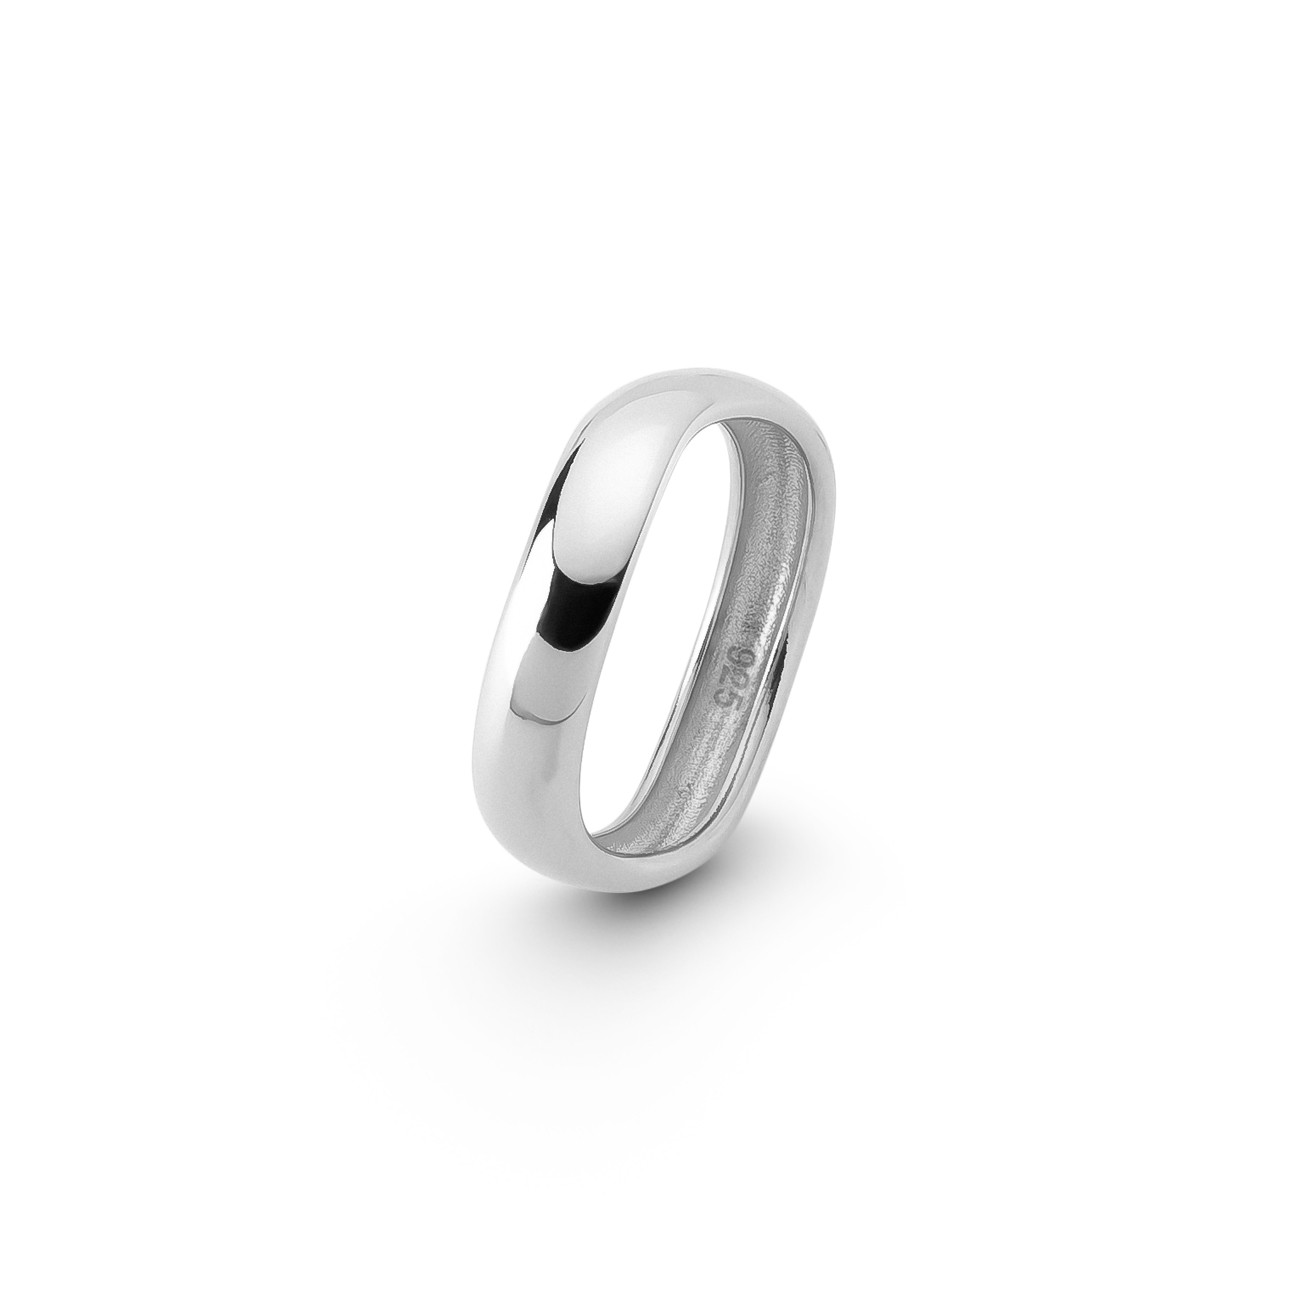 Silver wave ring, sterling silver 925